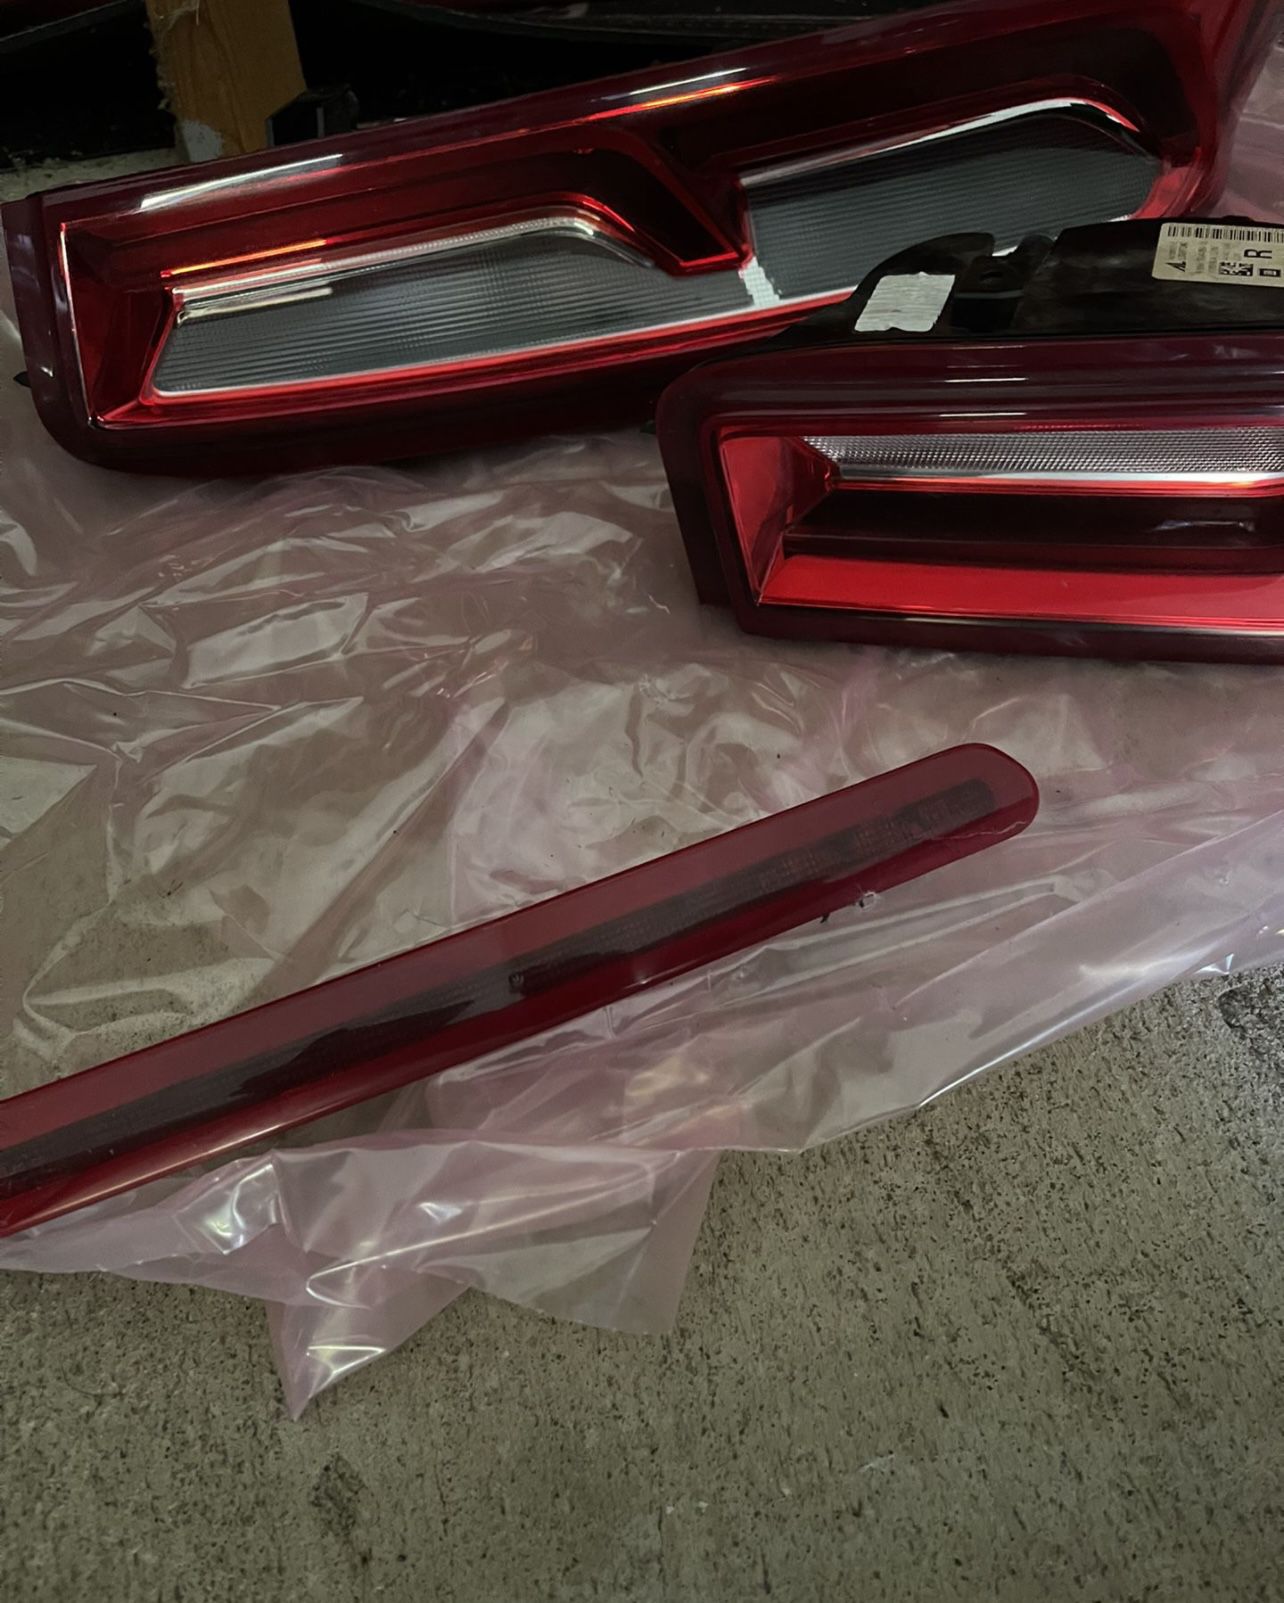 2017 Chevy Camaro OEM Rear Lights And Wing. 